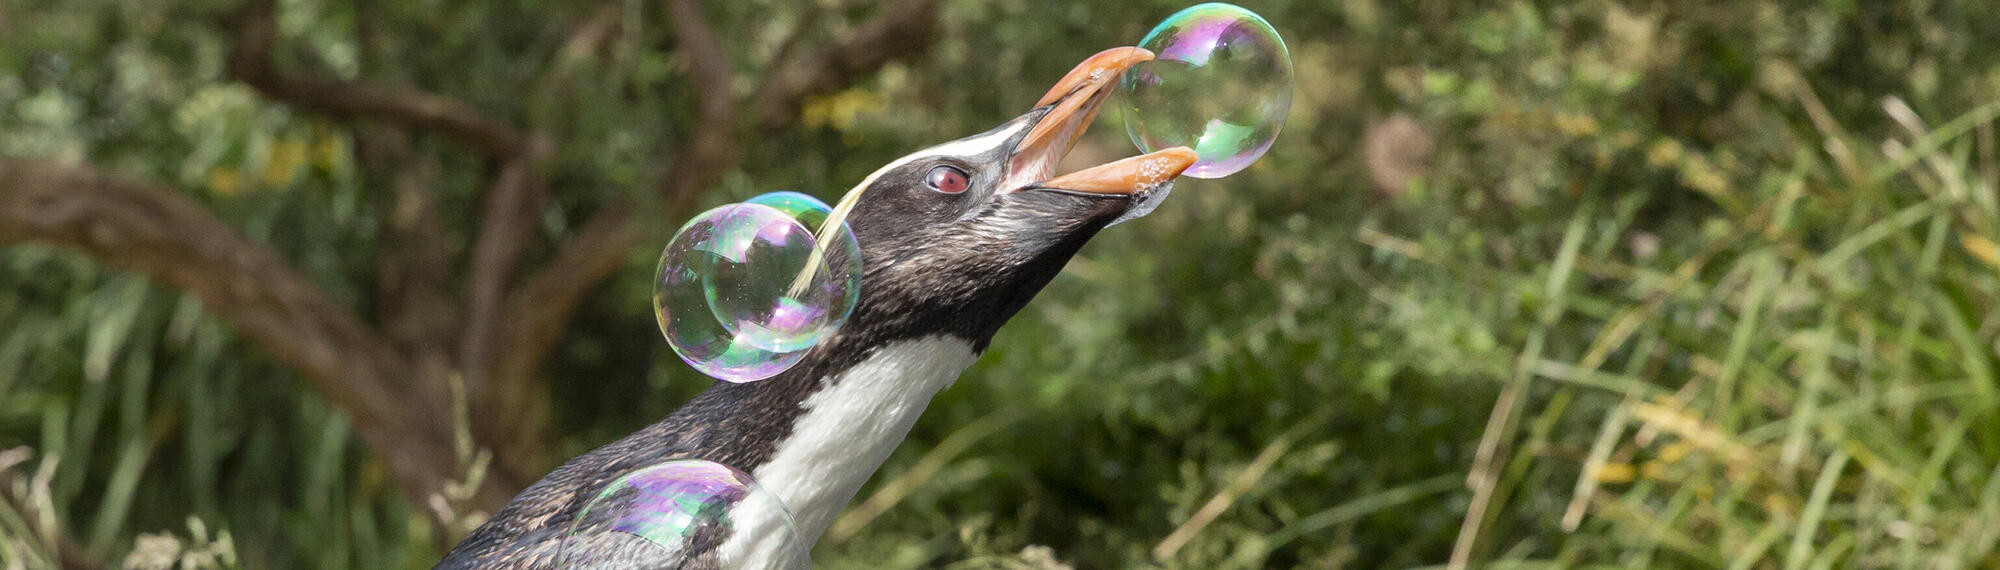 A penguin tried bursting a bubble with its beak